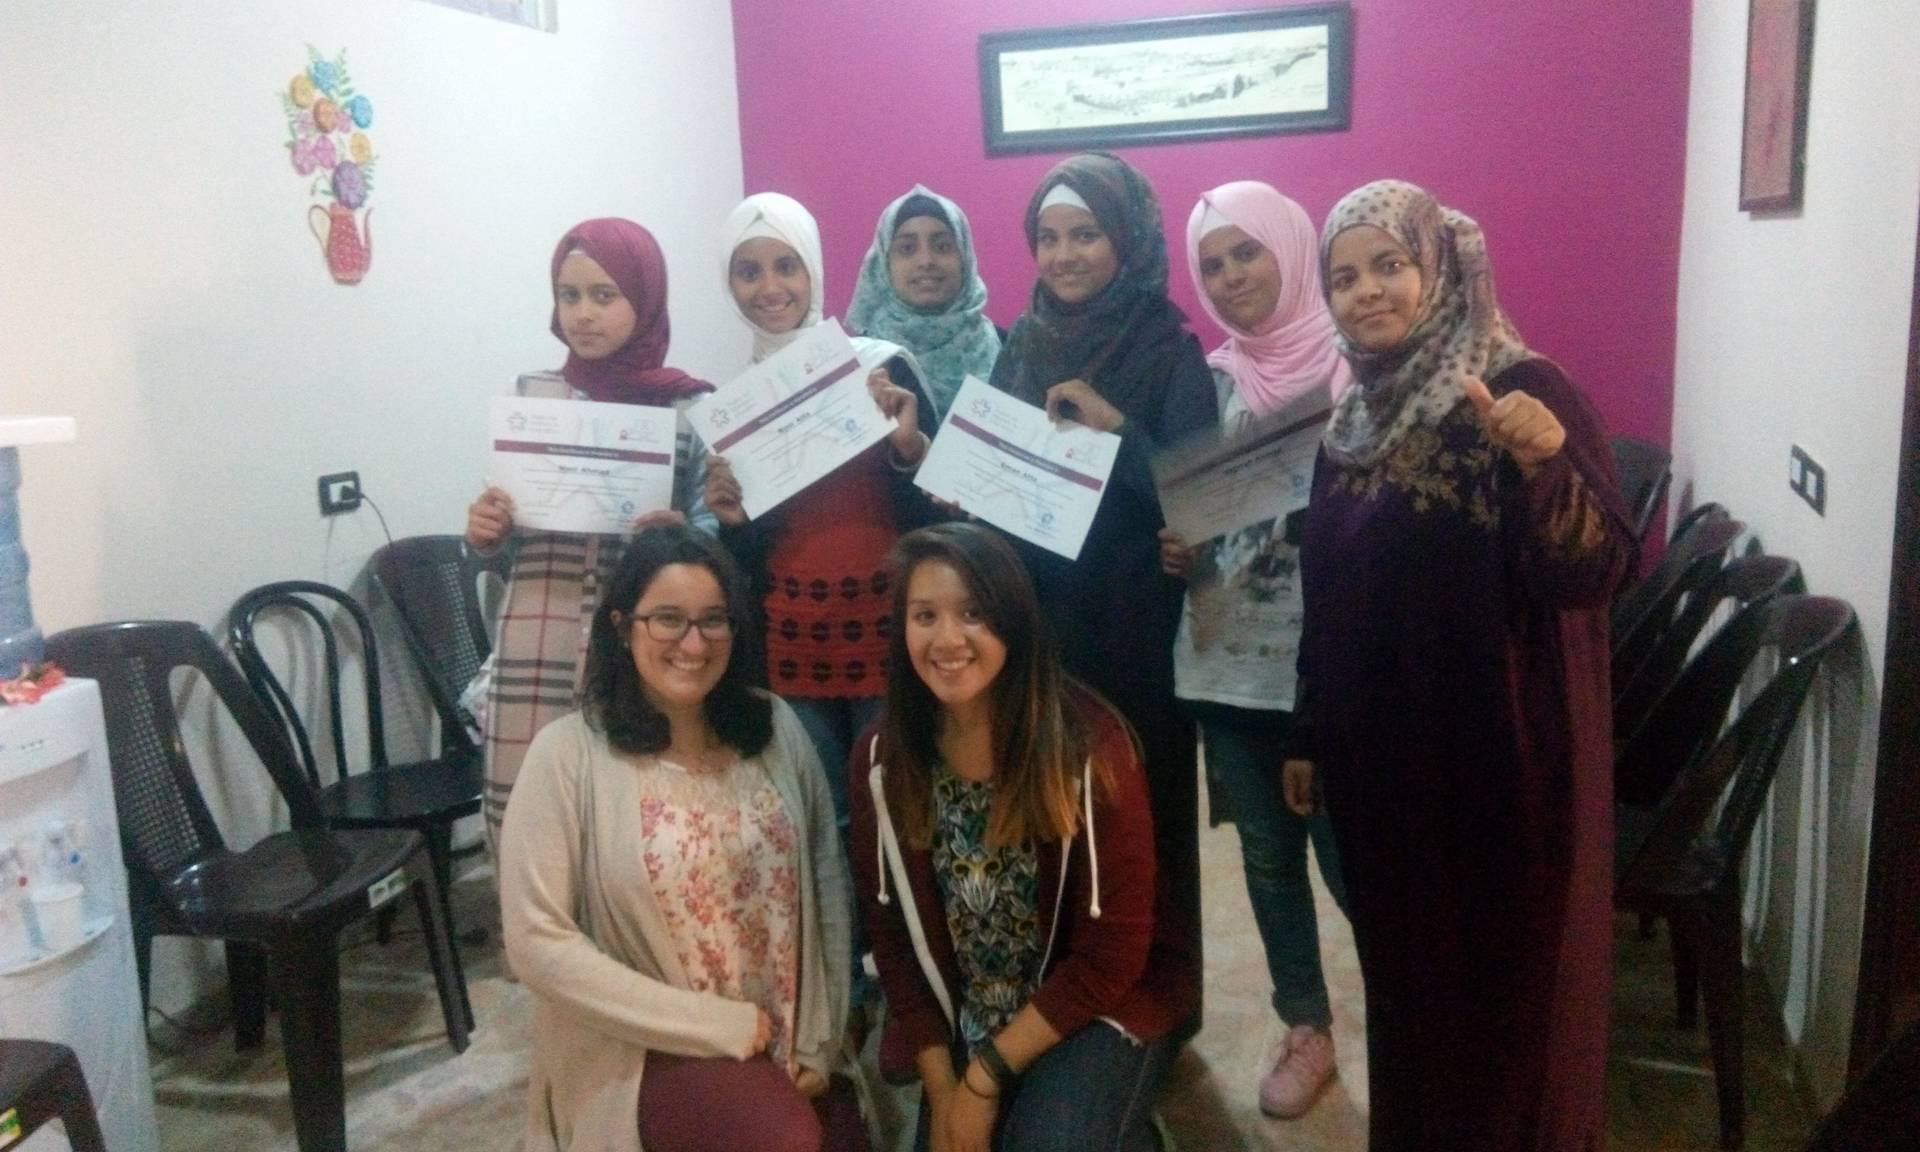 The Hopes for Women in Education community center where Nina Angeles conducted her Fulbright research and facilitated English language and professional development workshops for women and mothers in Jerash 'Gaza' camp during her Fulbright fellowship.